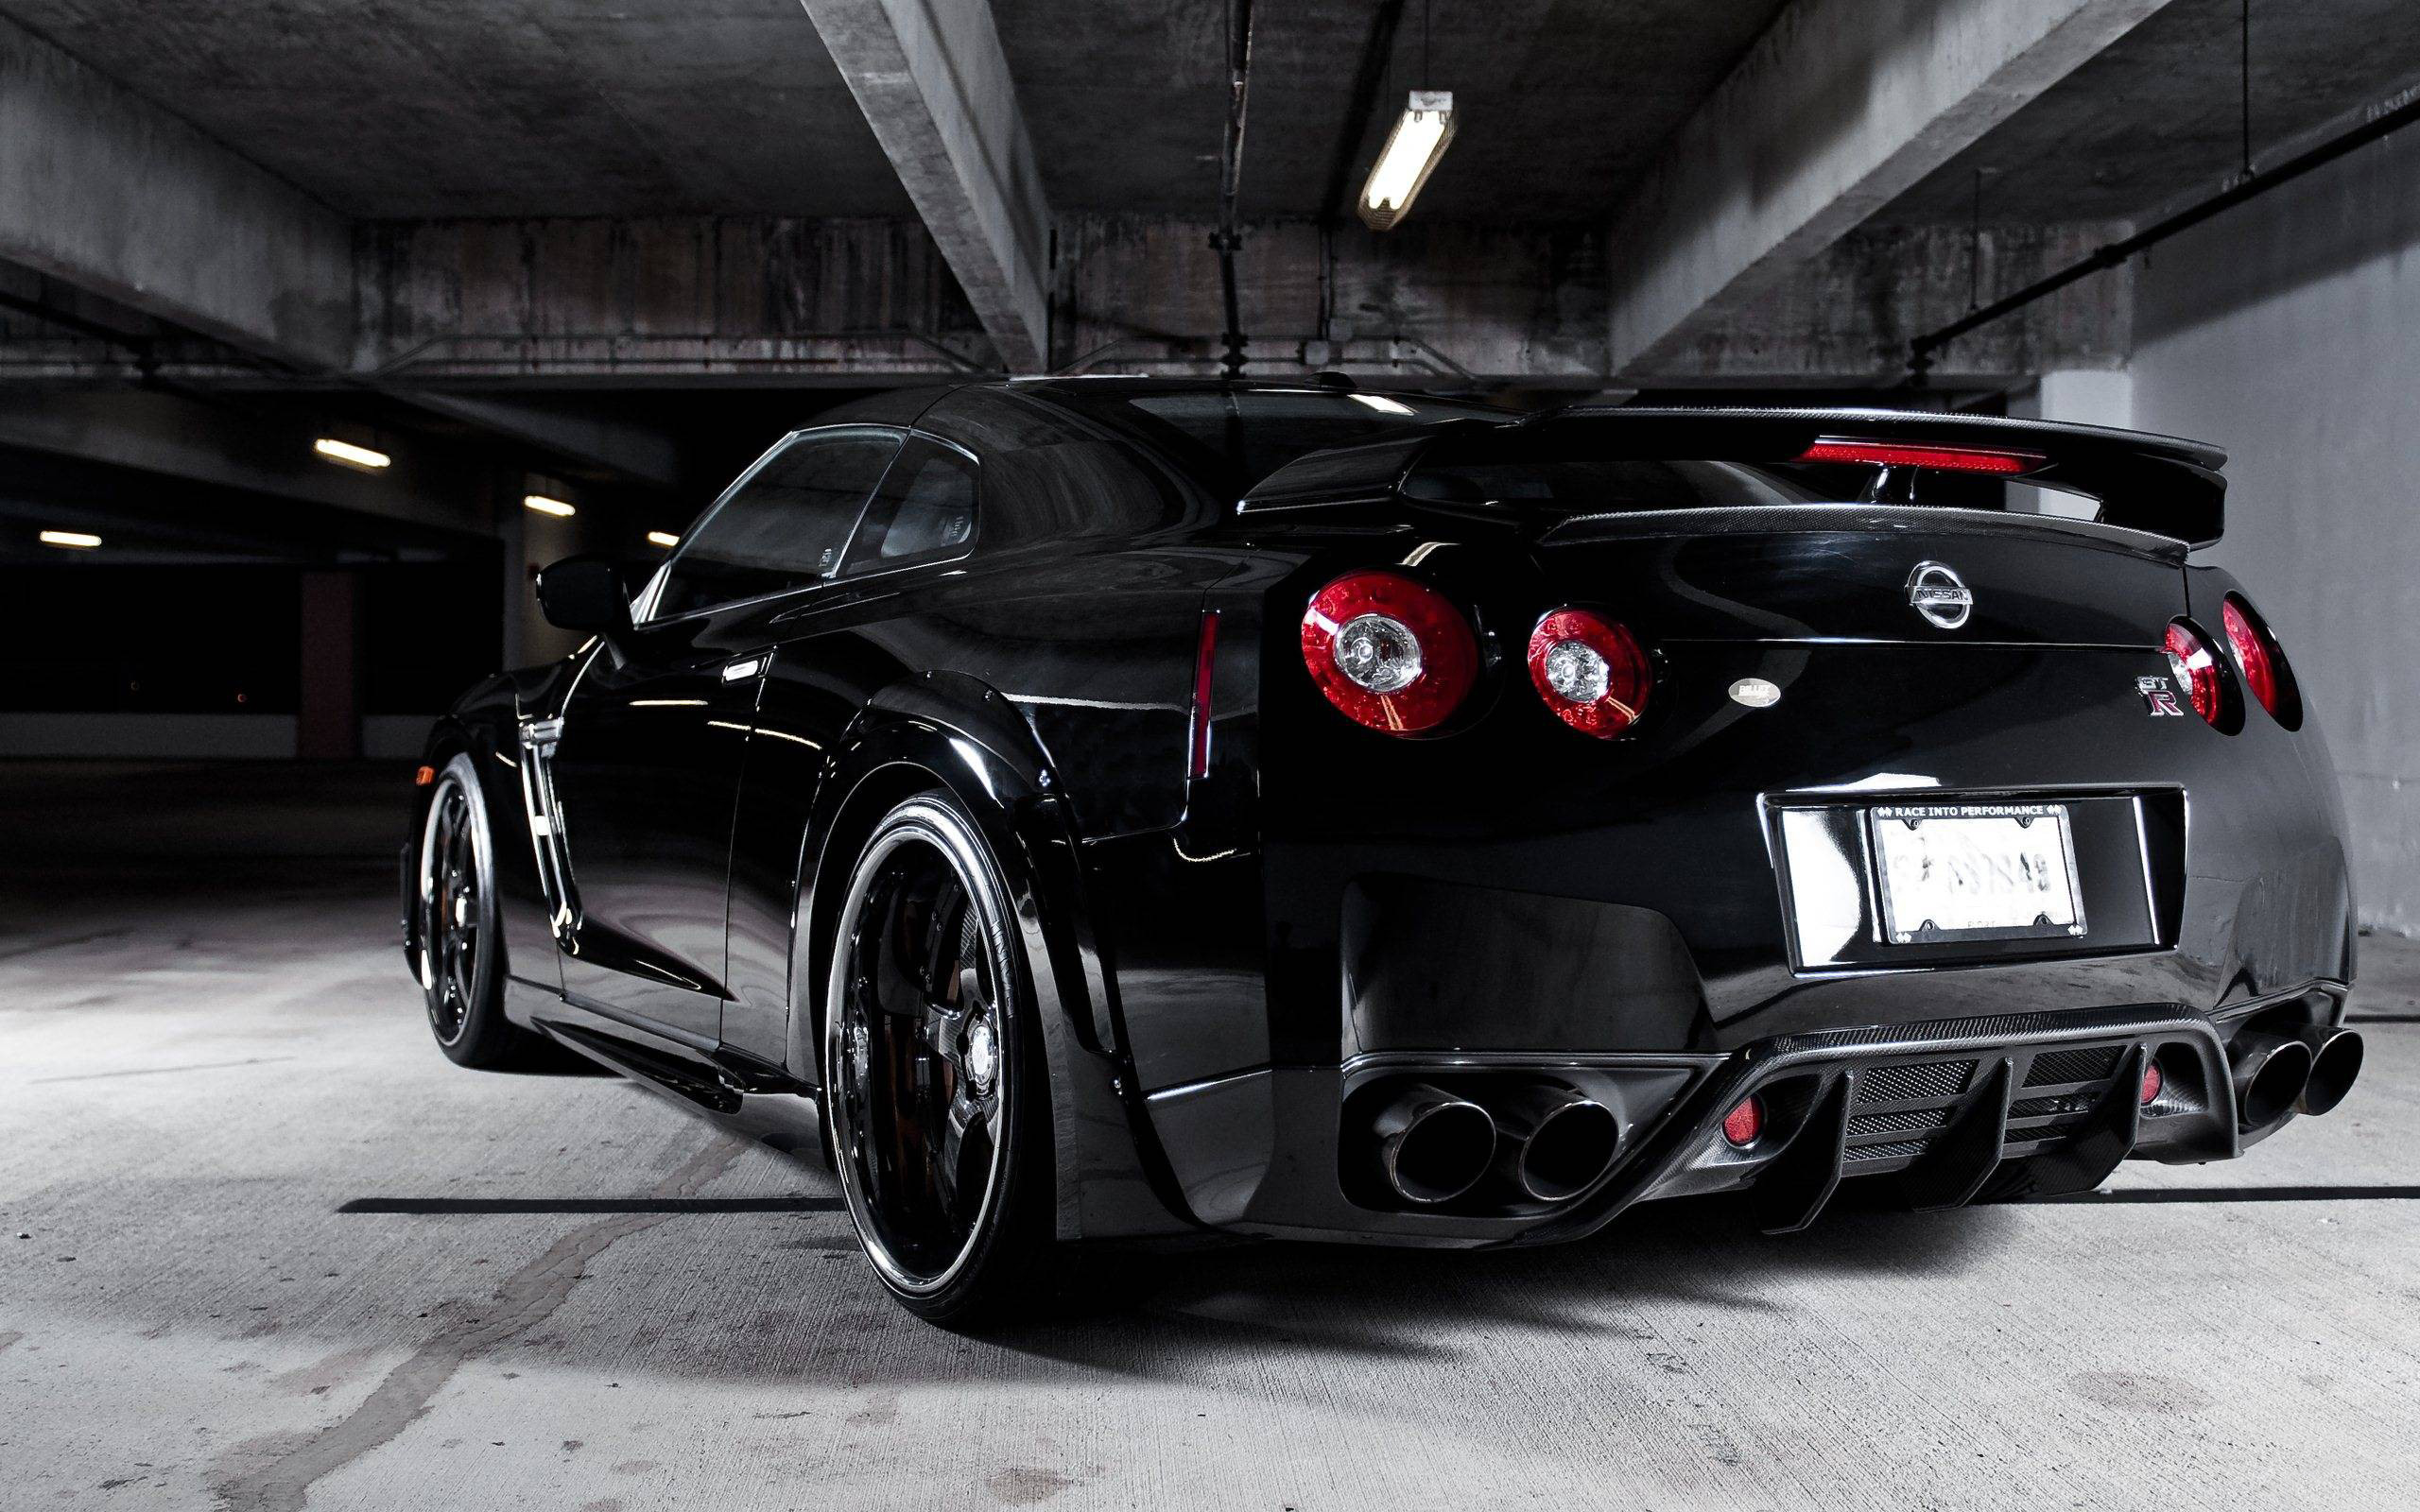 Outstanding Nissan Gtr Wallpaper for Android